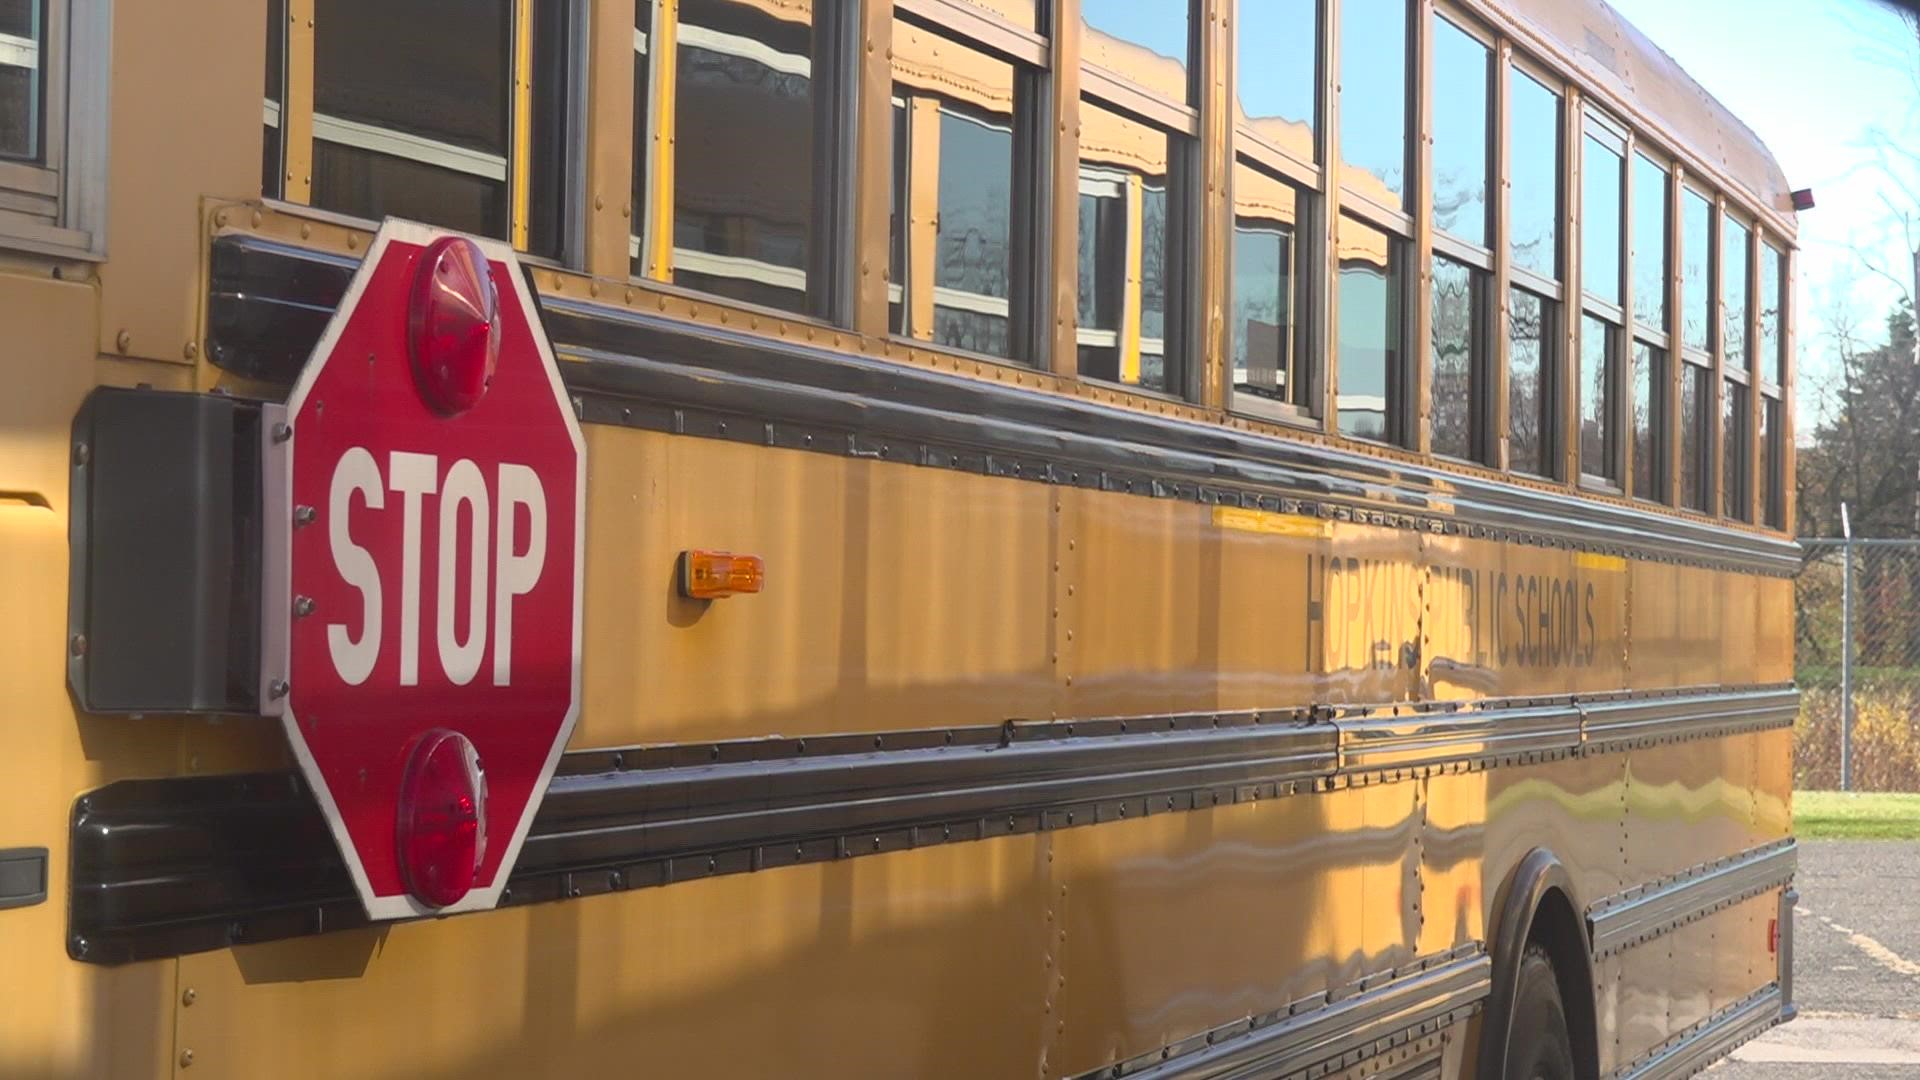 The three electric buses are part of the Environmental Protection Agency's Clean School Bus Program.